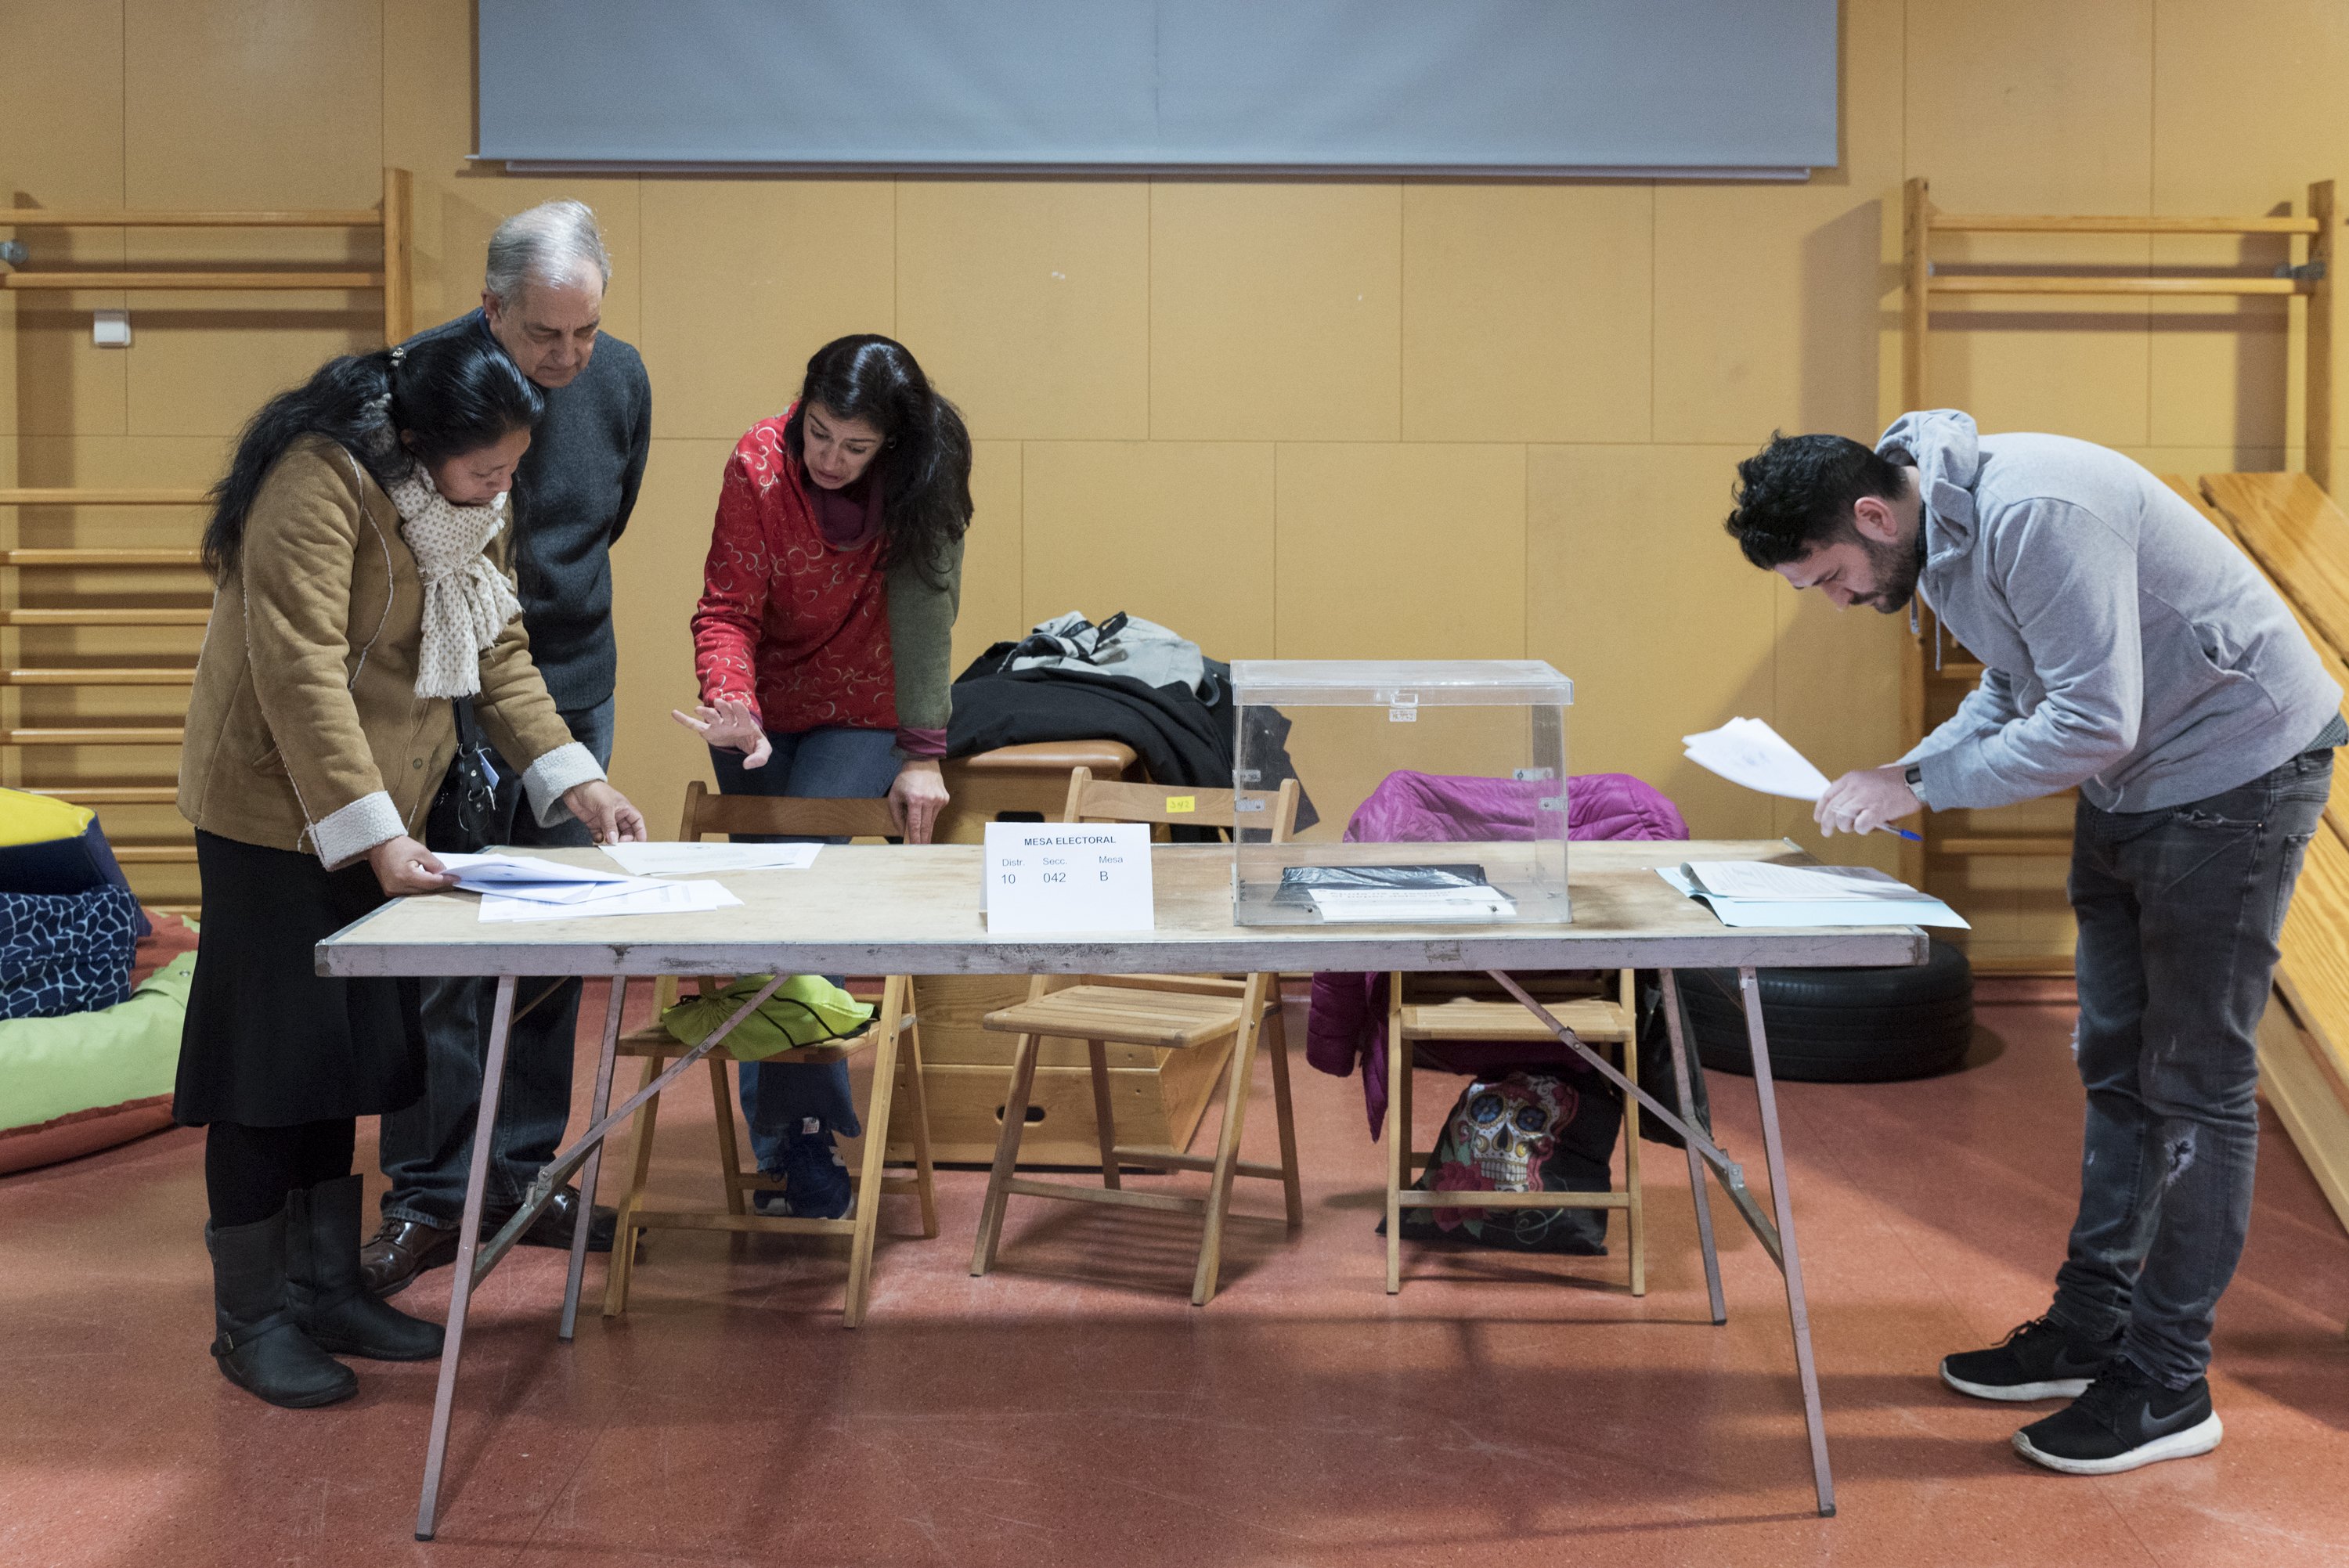 Maximum uncertainty over a Catalan election with record turnout